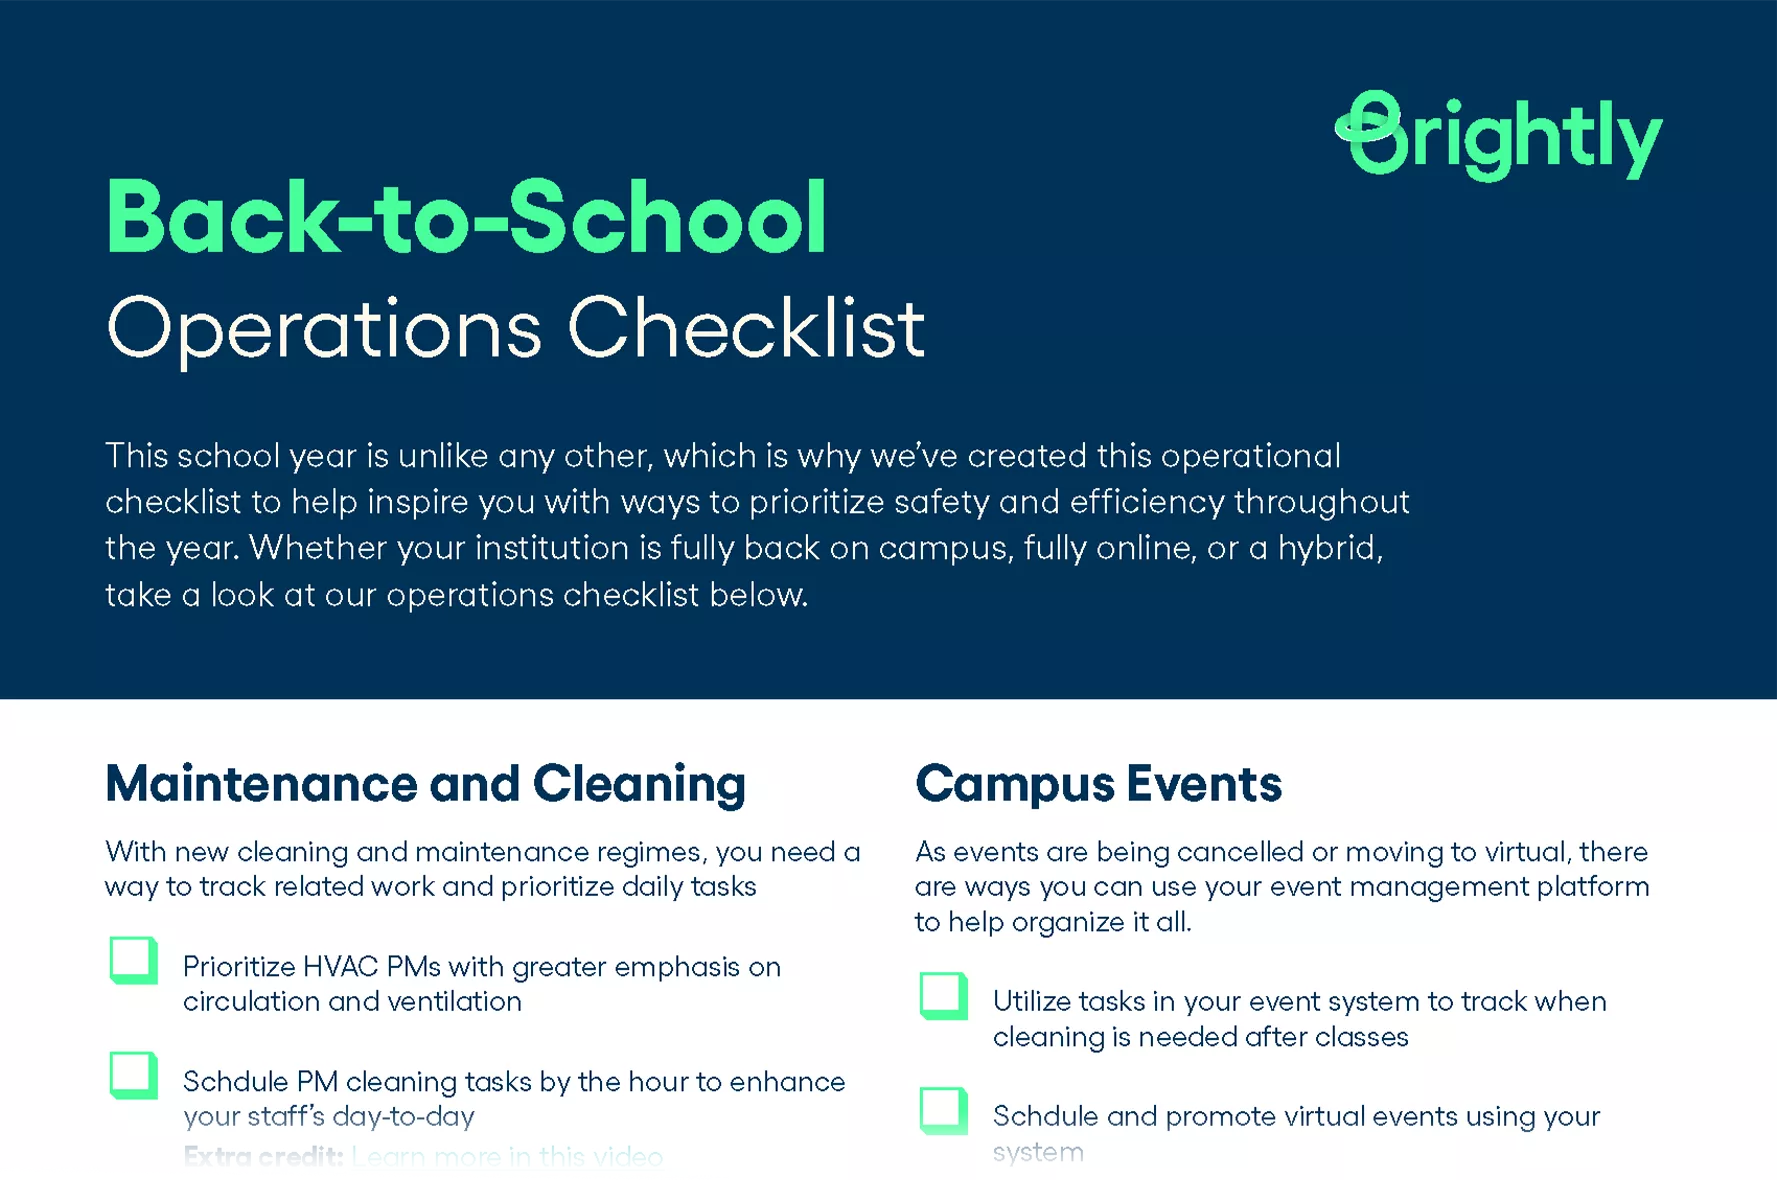 Back to School Checklist - Preview Image